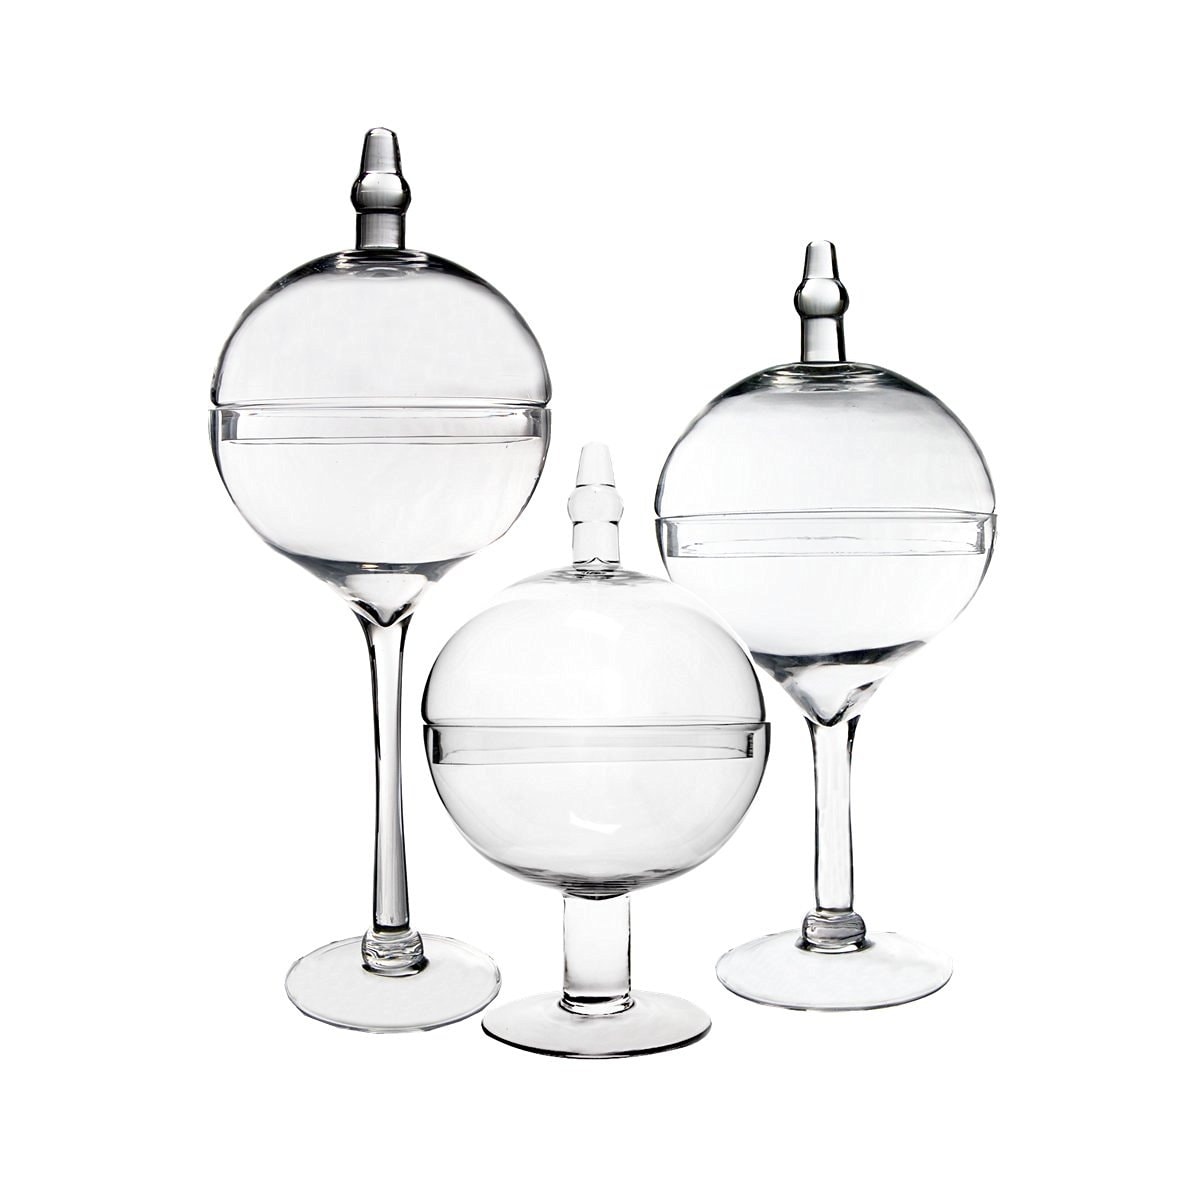 https://ak1.ostkcdn.com/images/products/is/images/direct/45bfdae6435318a088260c7c66afc3ccc08c8a4b/CYS%C2%AE-Apothecary-Glass-Jar-Bubble-Bowl-with-Stem-Candy-Buffet-Containers-Vase-with-Lid%2C-Set-of-3.jpg